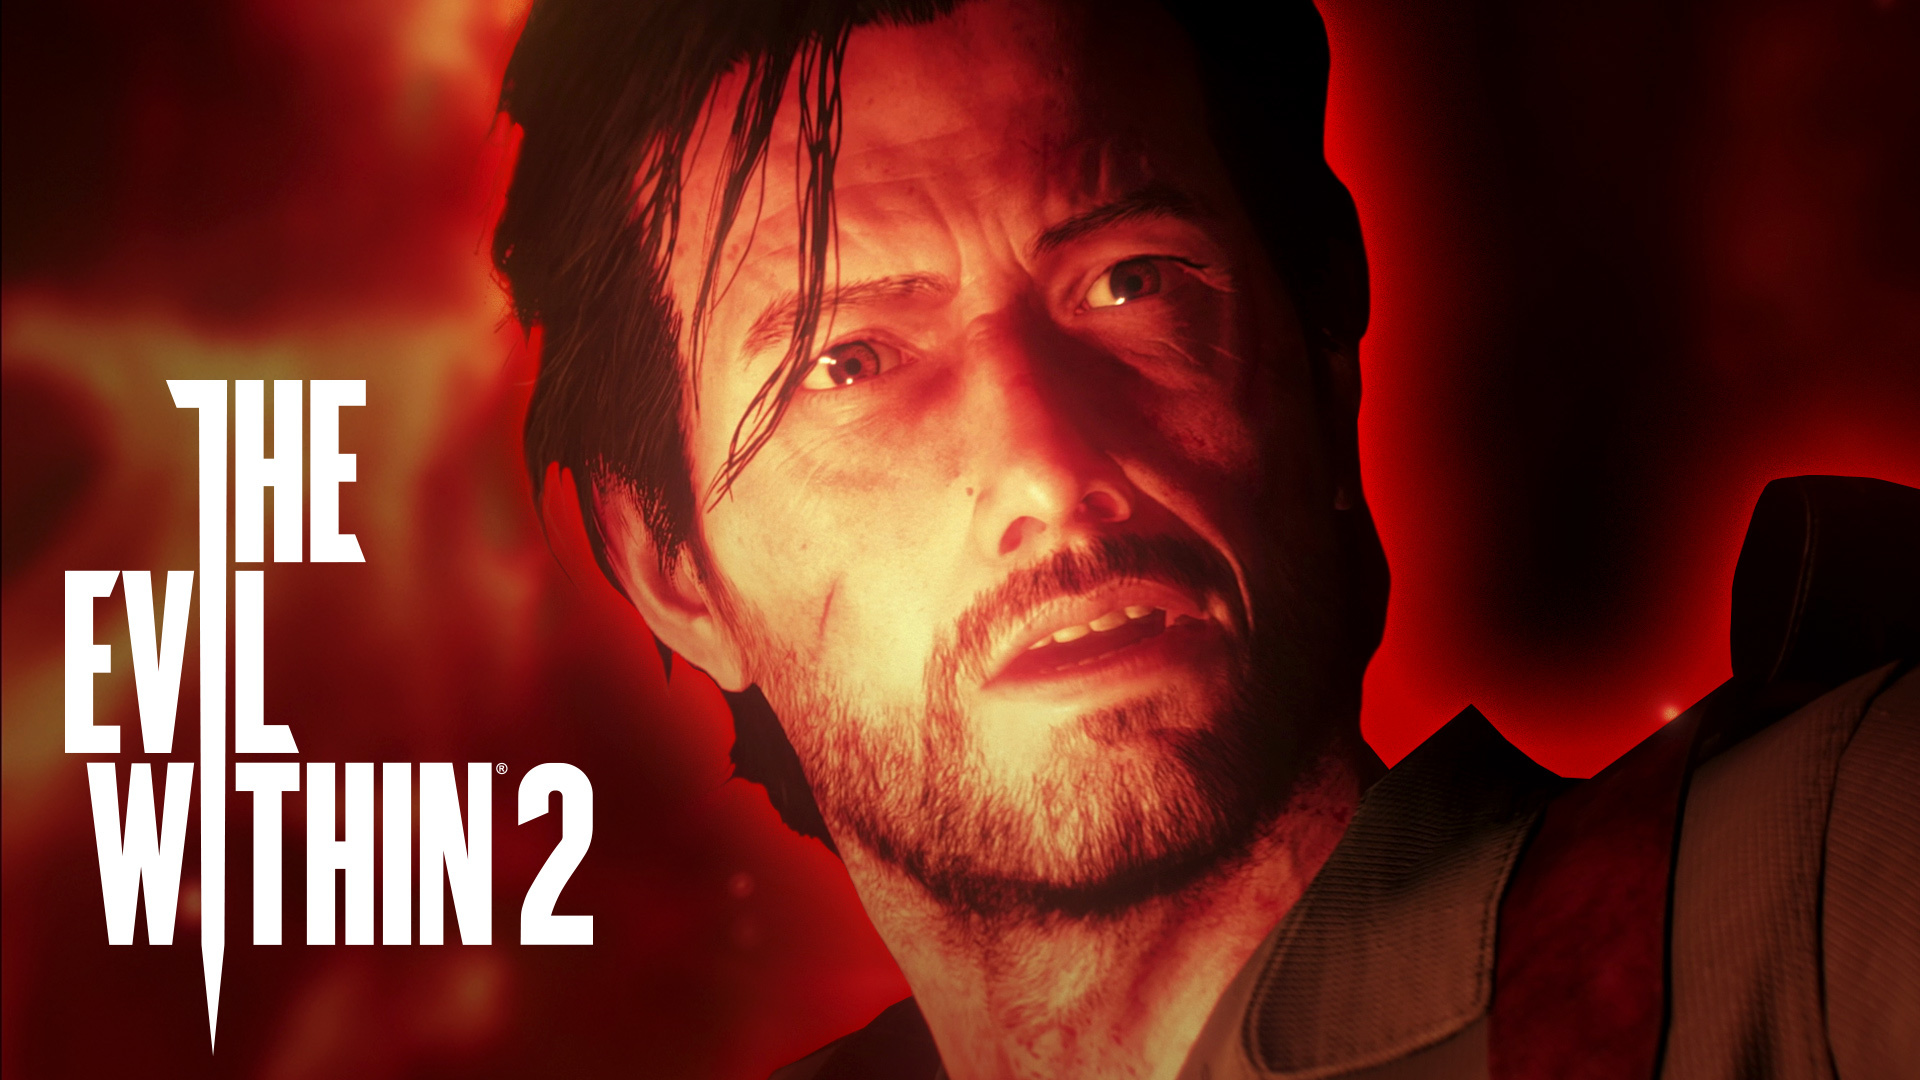 Steam :: The Evil Within 2 :: The Evil Within 2 | Launch Trailer [Red Band]